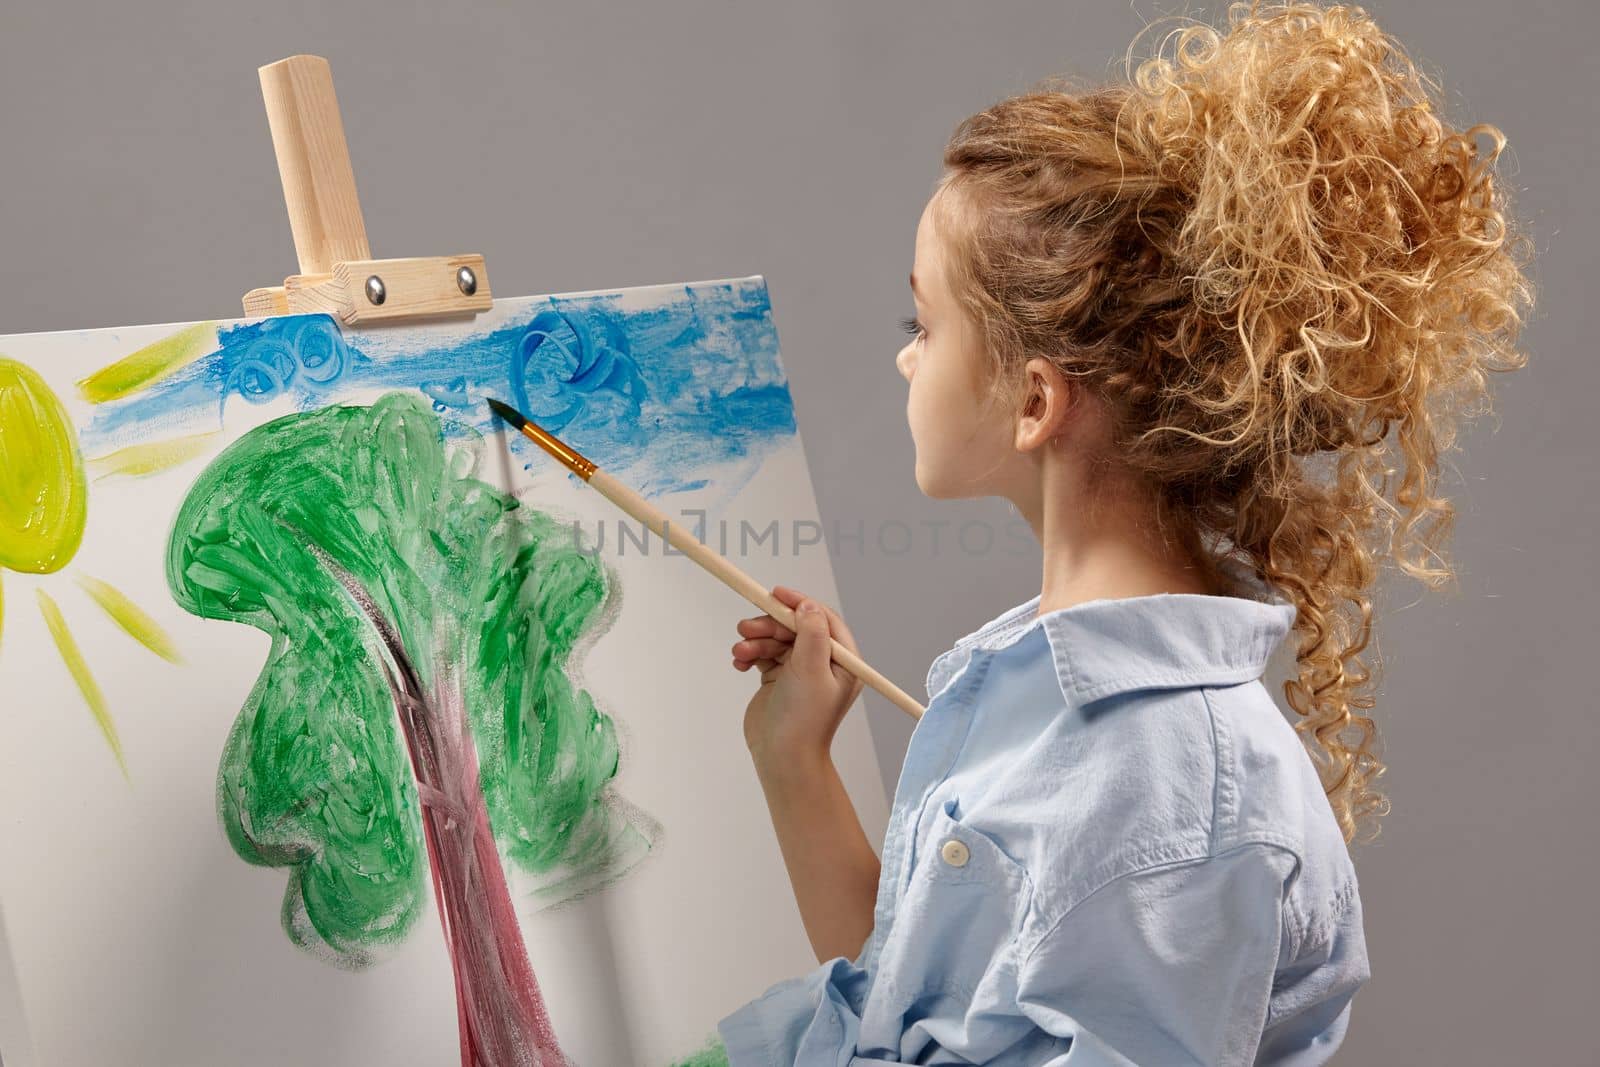 Charming school girl whith a curly hair, wearing in a blue shirt and white t-shirt is painting with a watercolor brush on an easel, standing on a gray background.